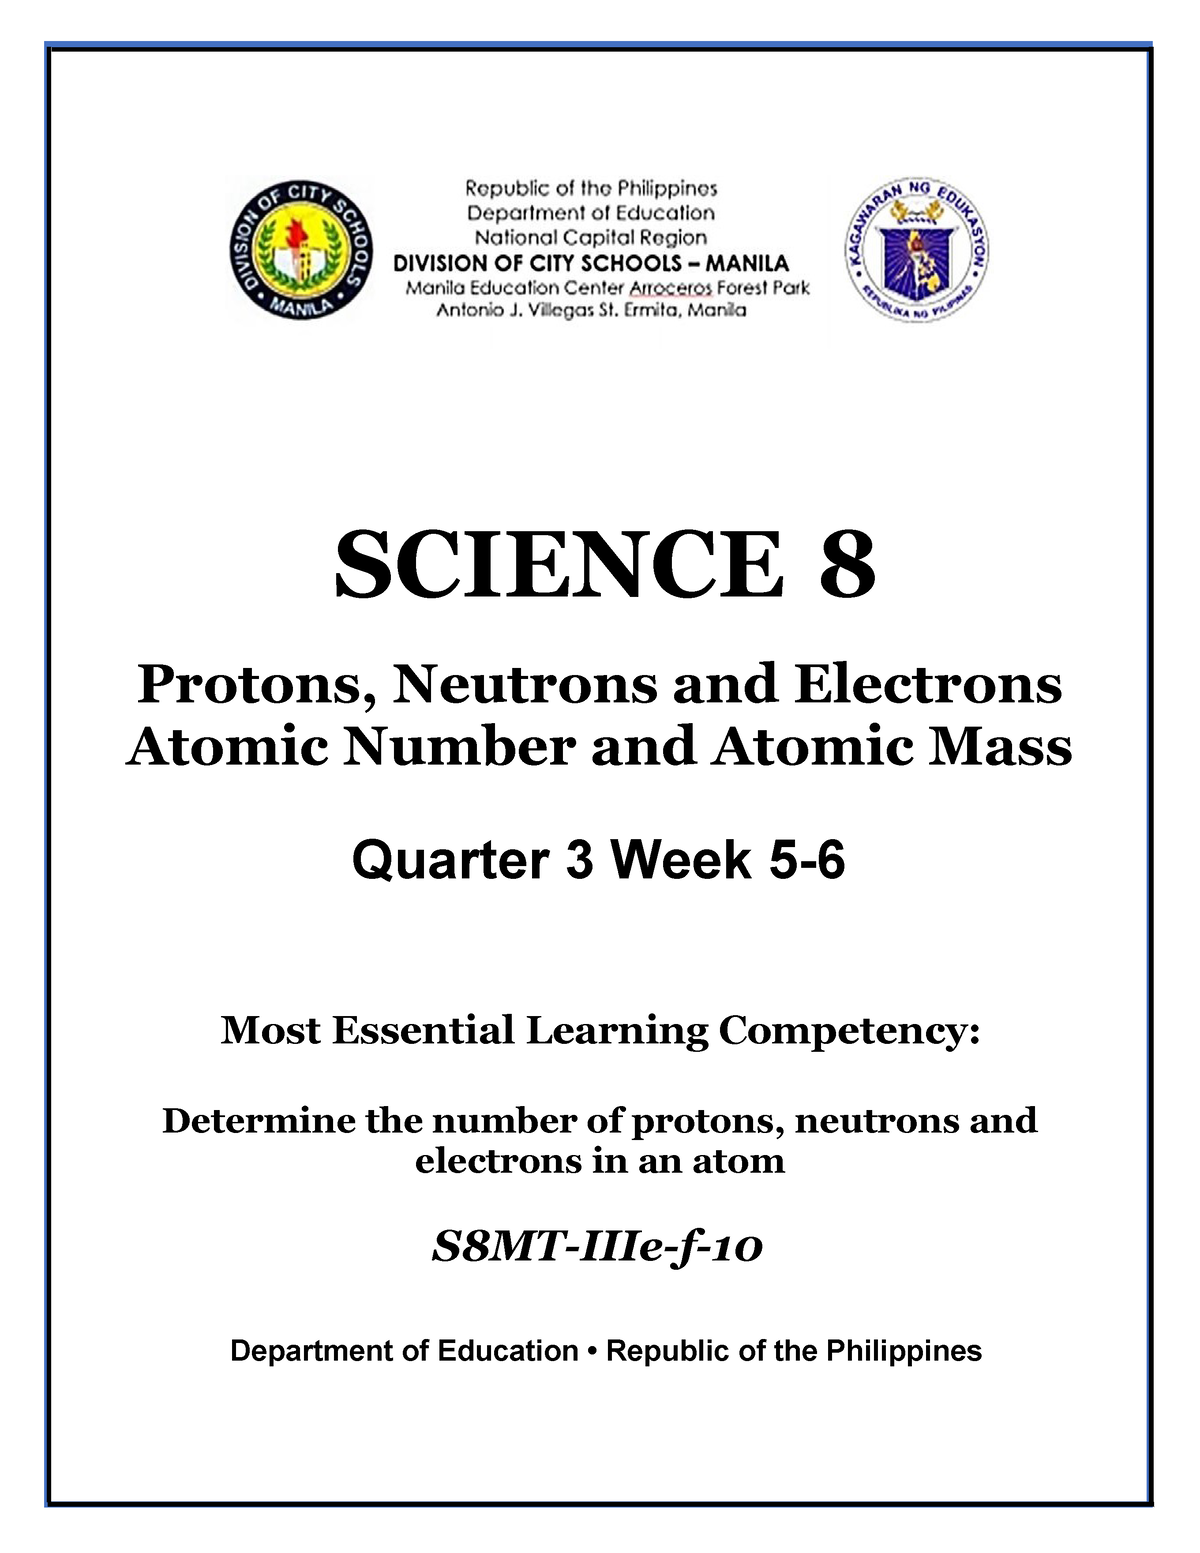 determine-the-number-of-protons-neutrons-and-electrons-of-an-atom-science-8-protons-neutrons